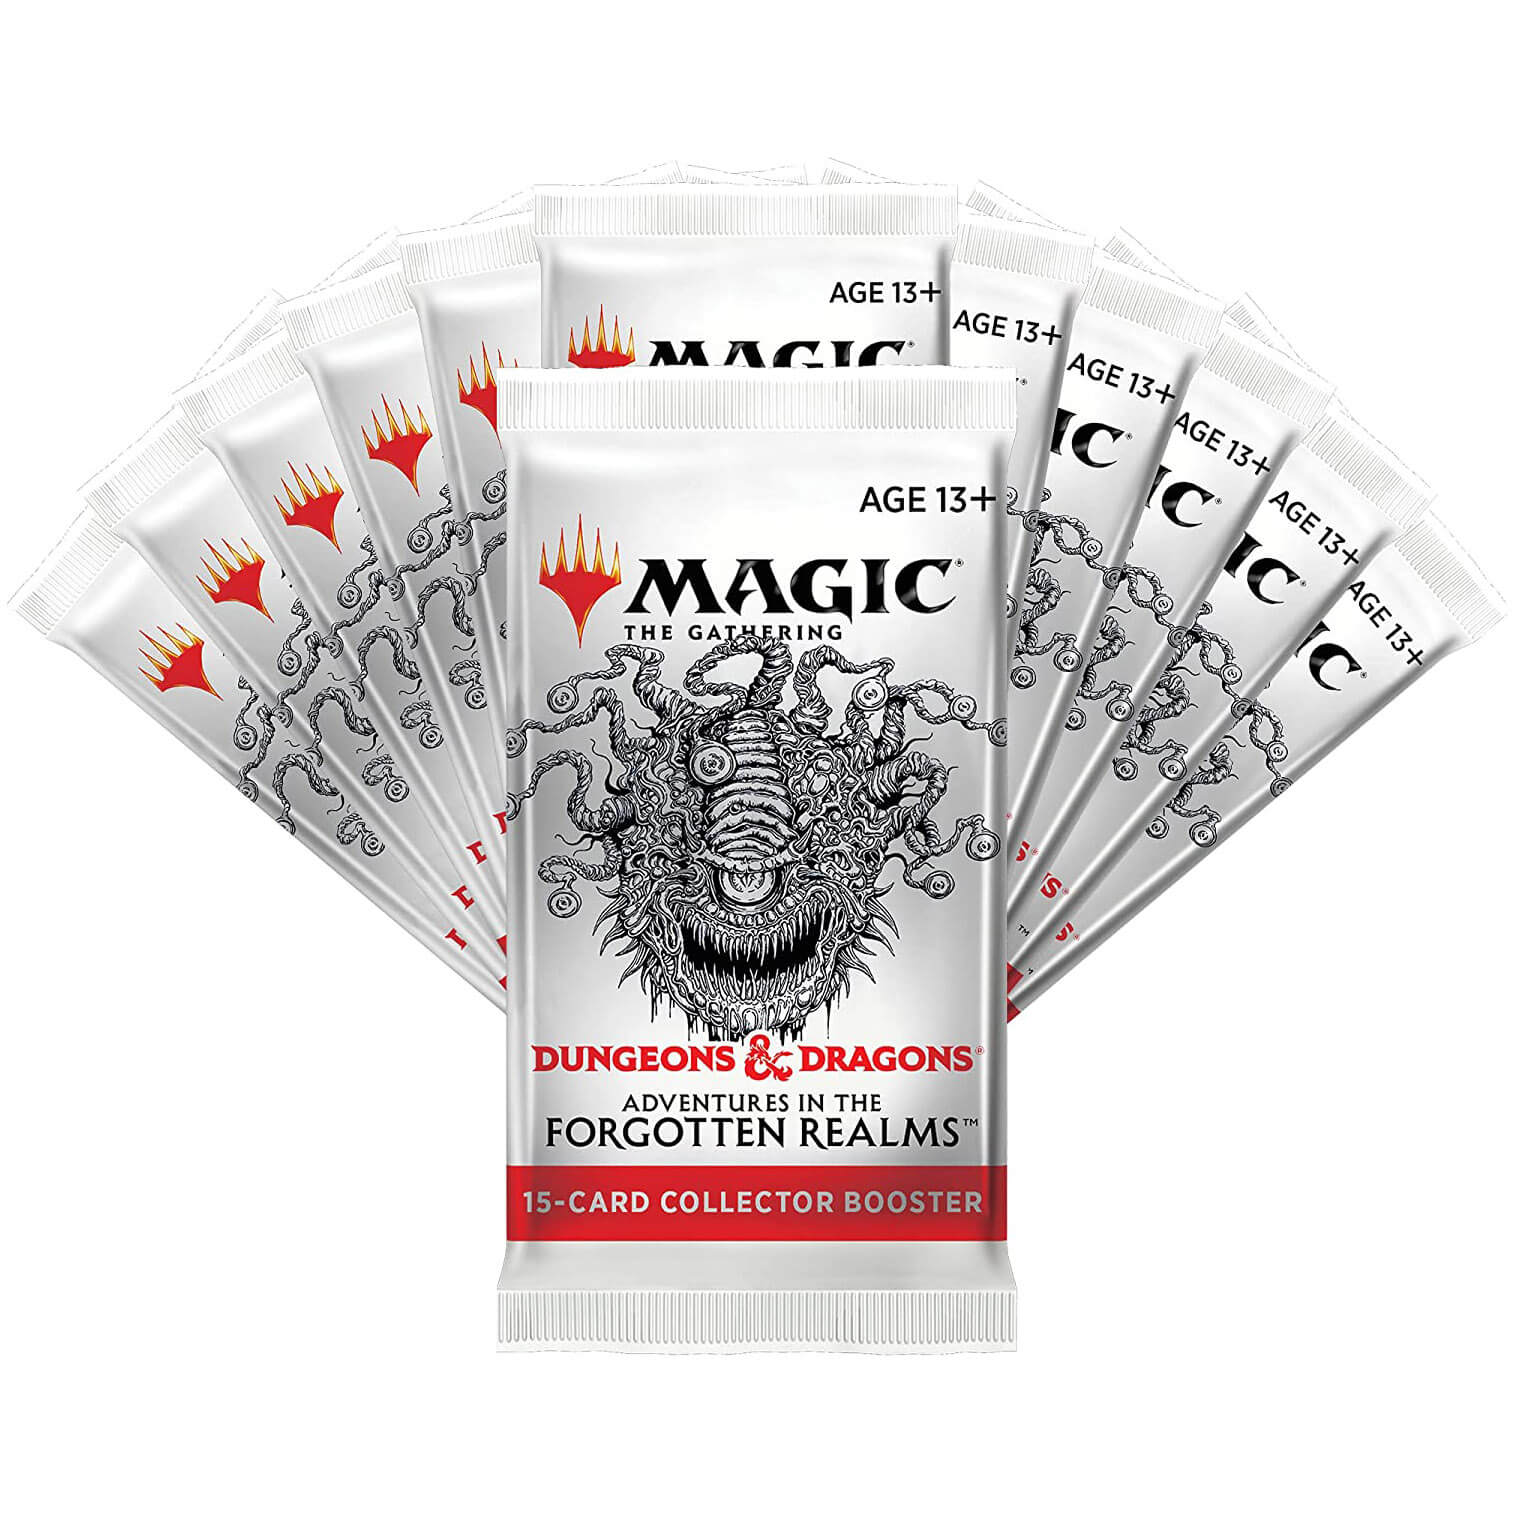 Magic The Gathering Adventures in the Forgotten Realms Collector Booster Box